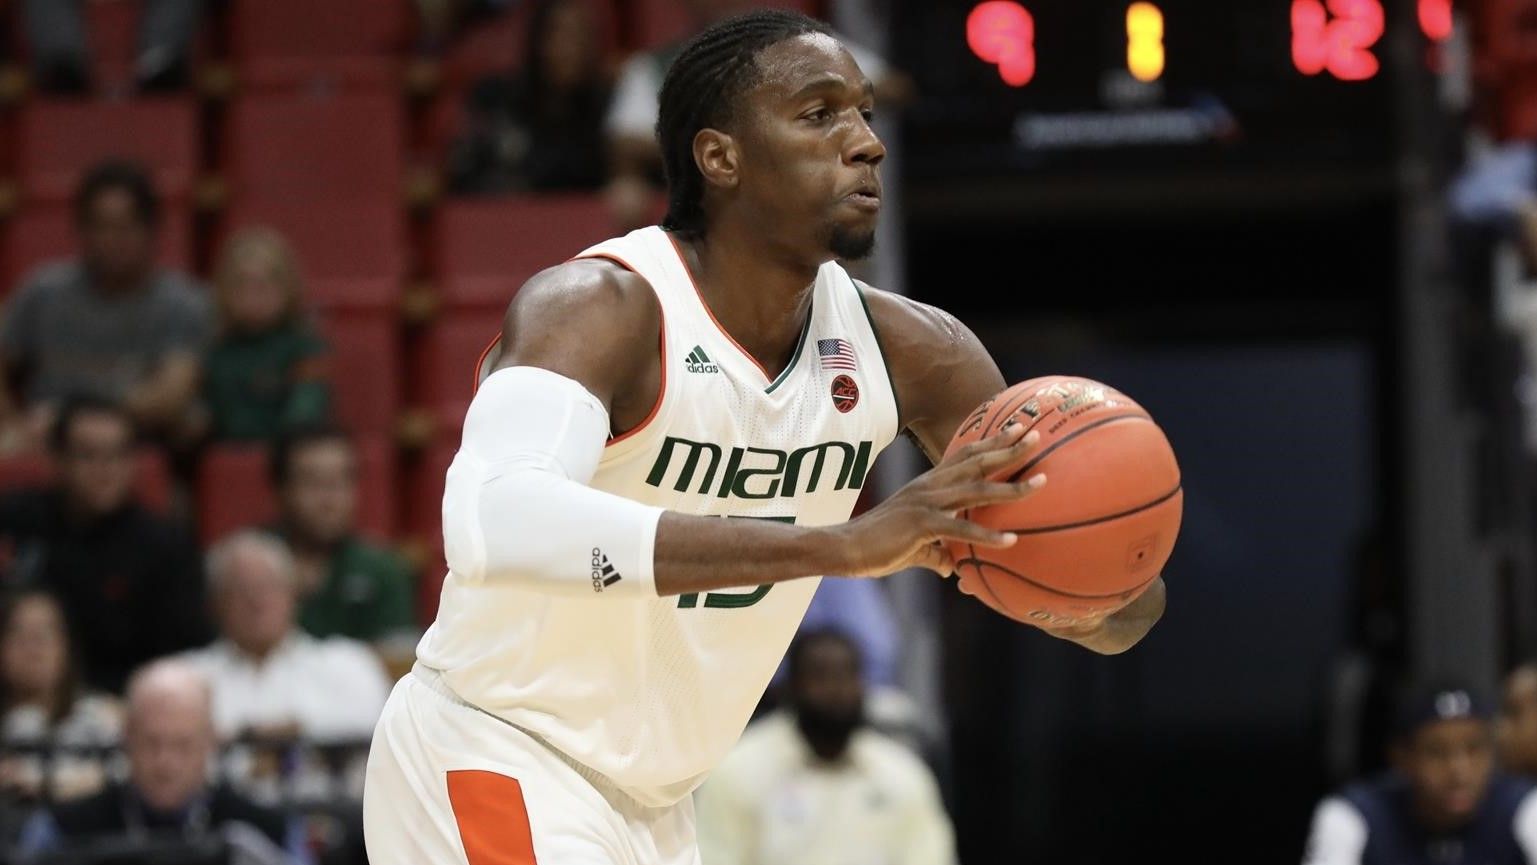 Yale Rallies to Top Canes, 77-73